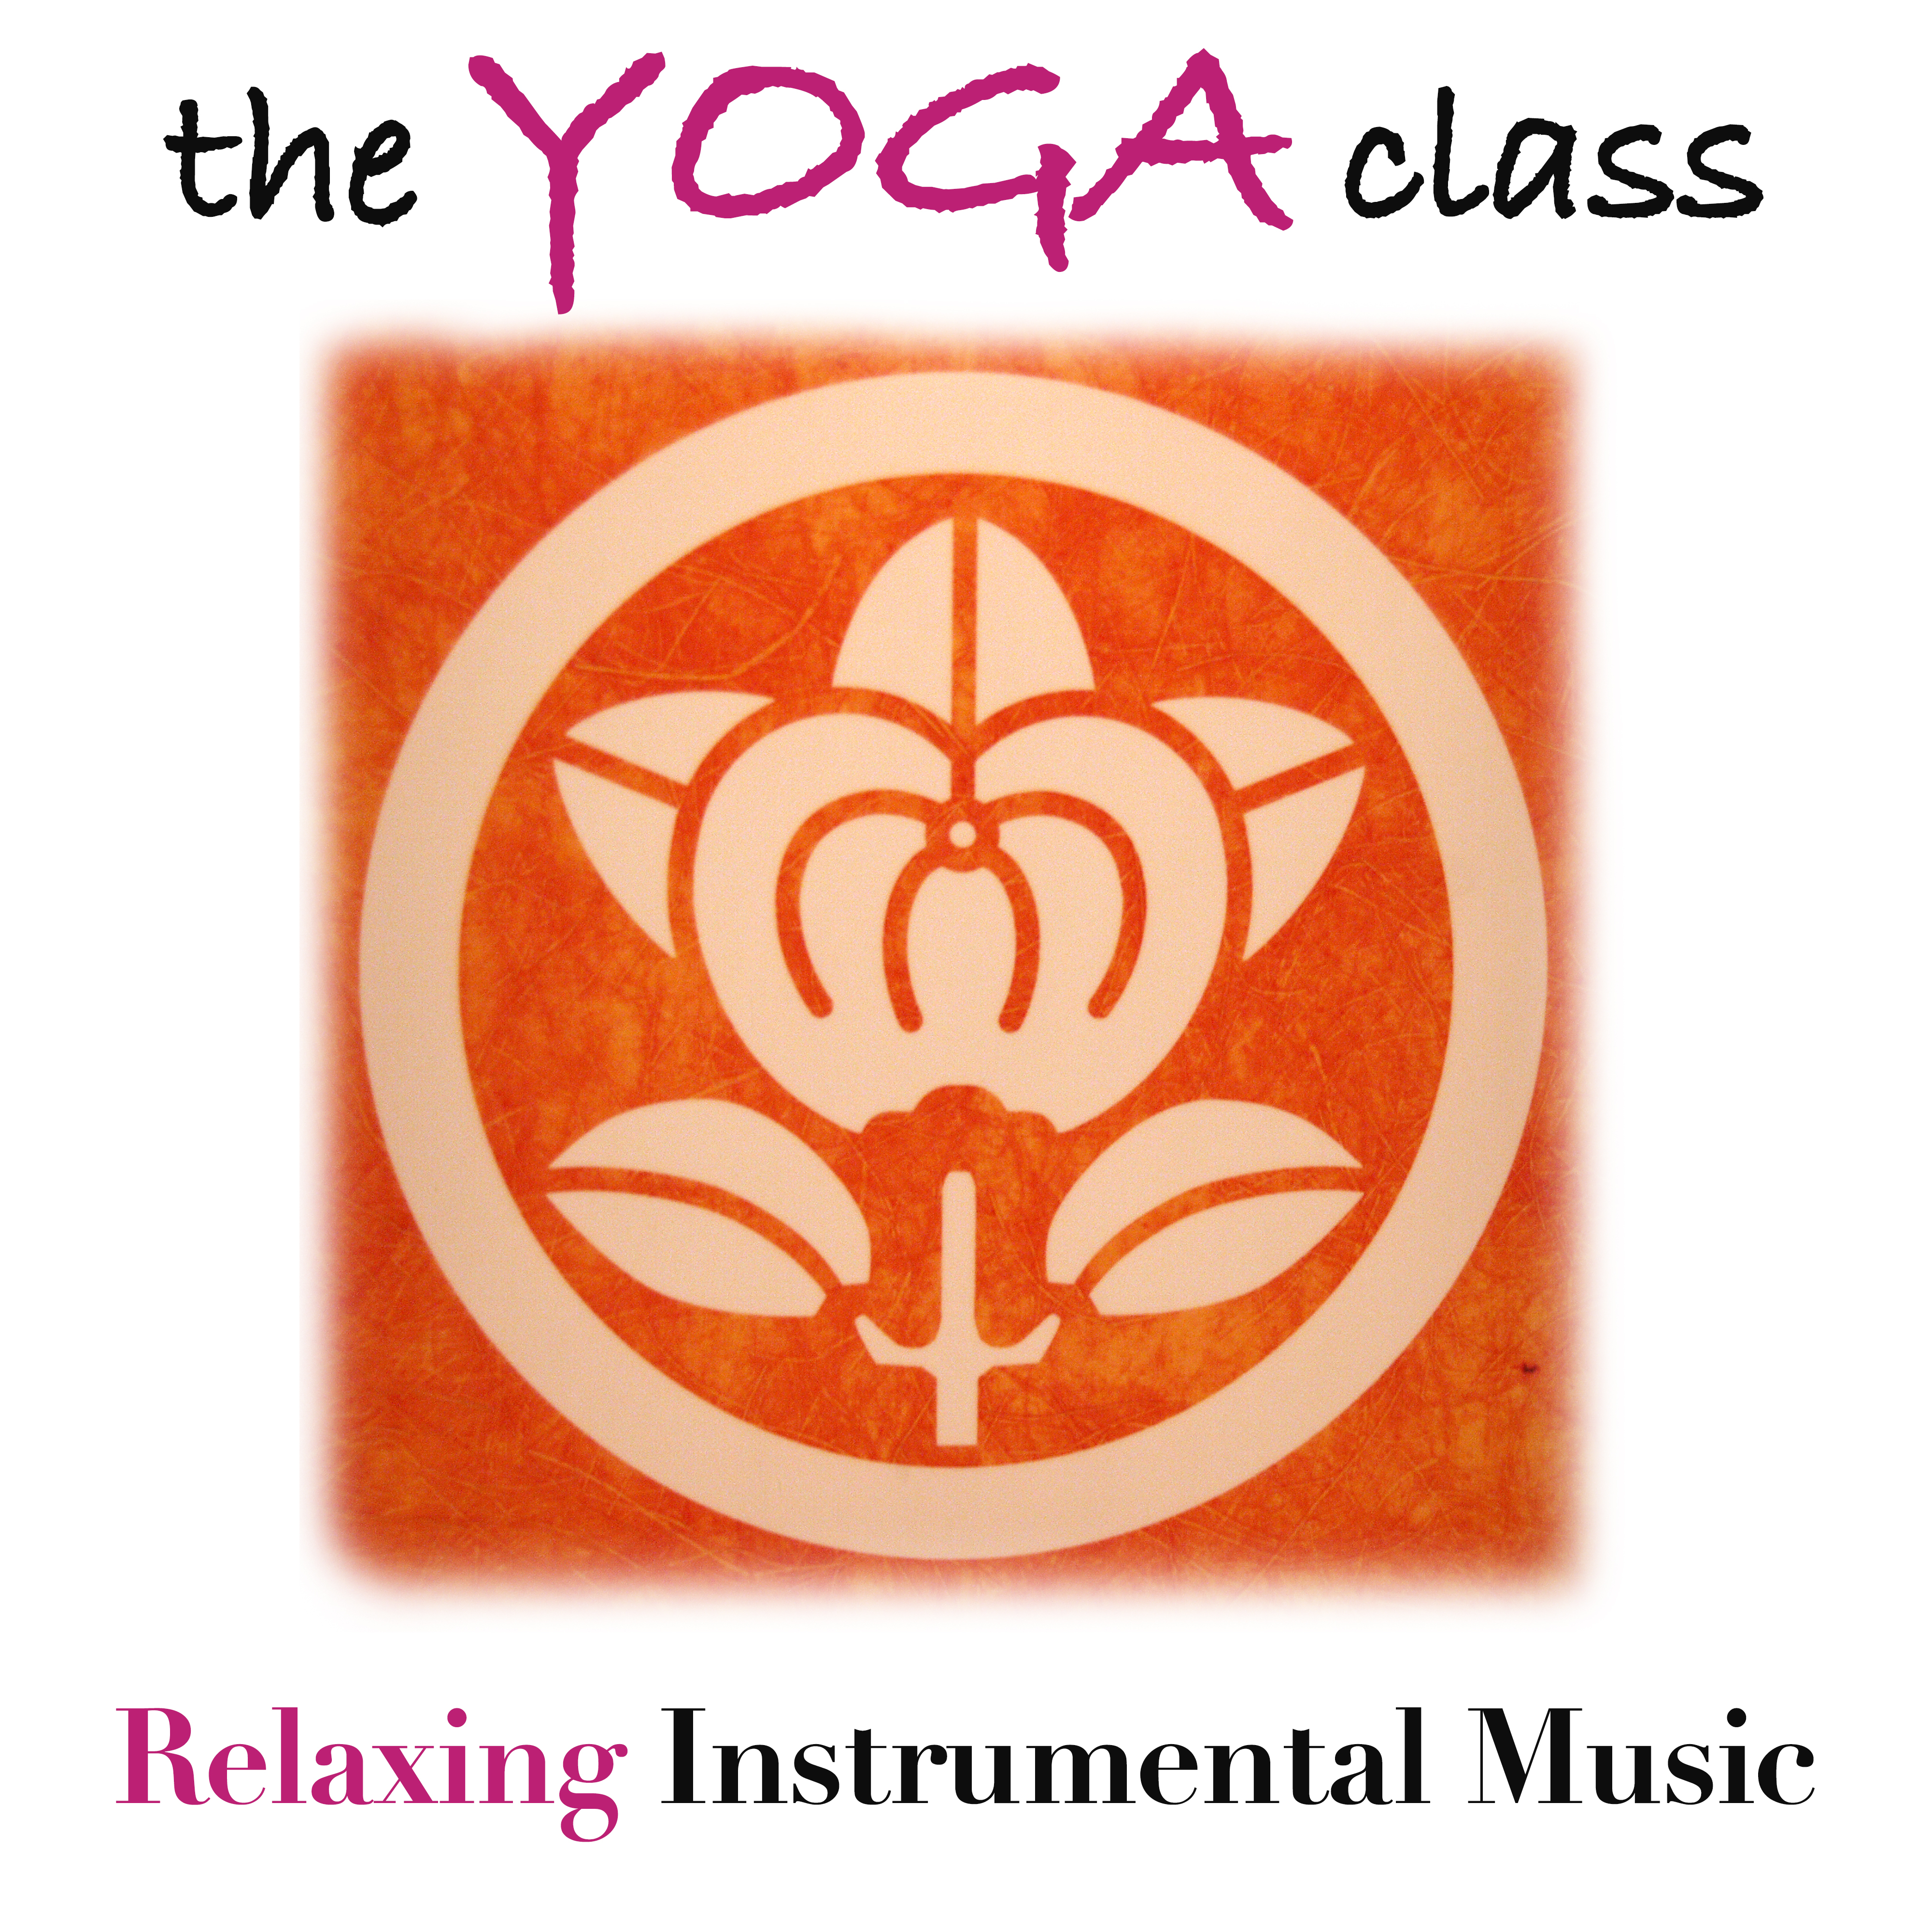 The Yoga Class: Relaxing Instrumental Music for your Yoga Practice with Carefully Selected Relaxing Sounds to help you Find Inner Peace and Tranquility